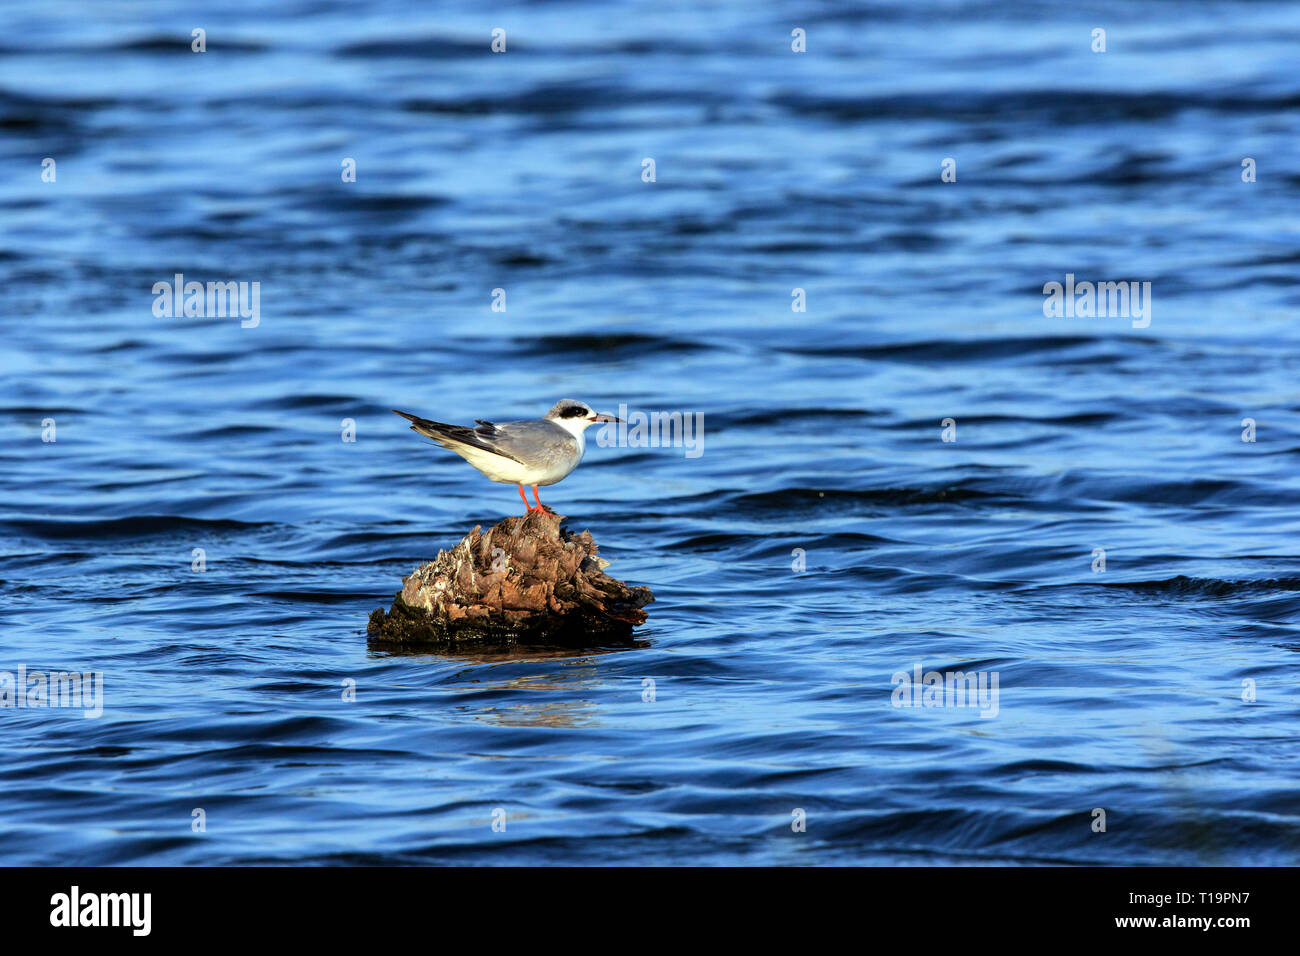 Forster's Tern Sterna forsteri)  perched on a tree trunk in the middle of water. Stock Photo